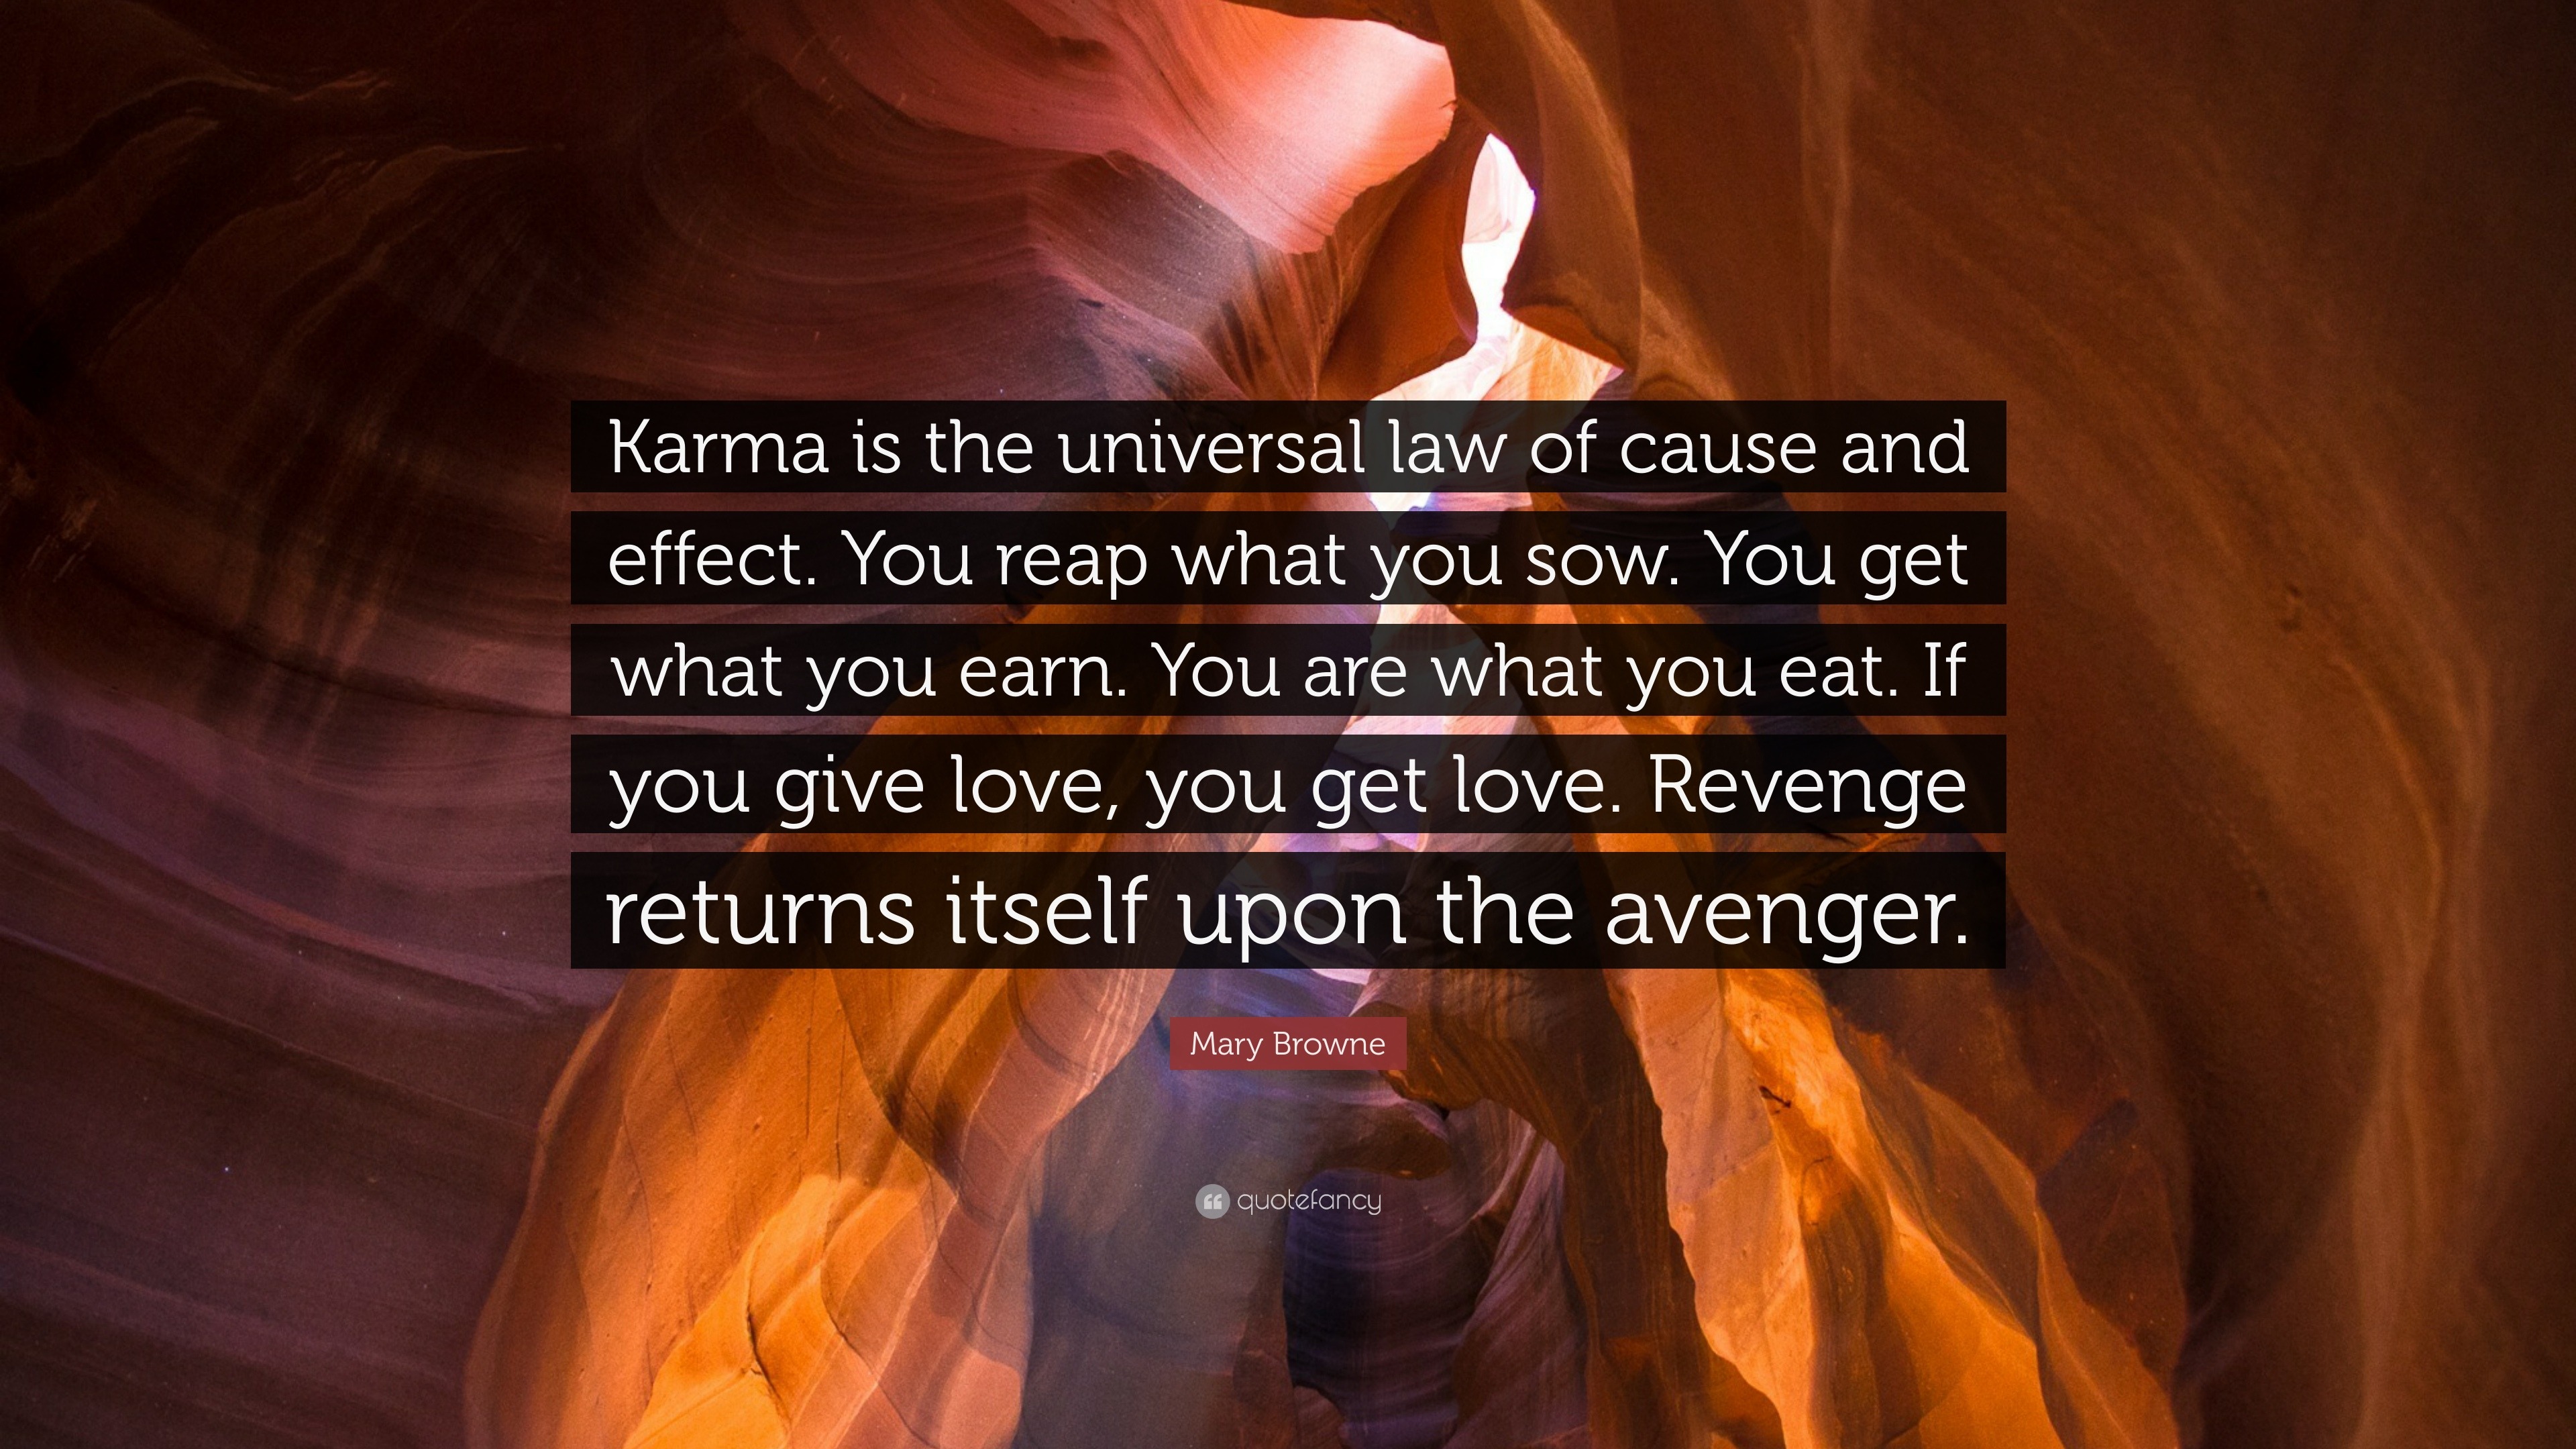 karma is the universal law of causality